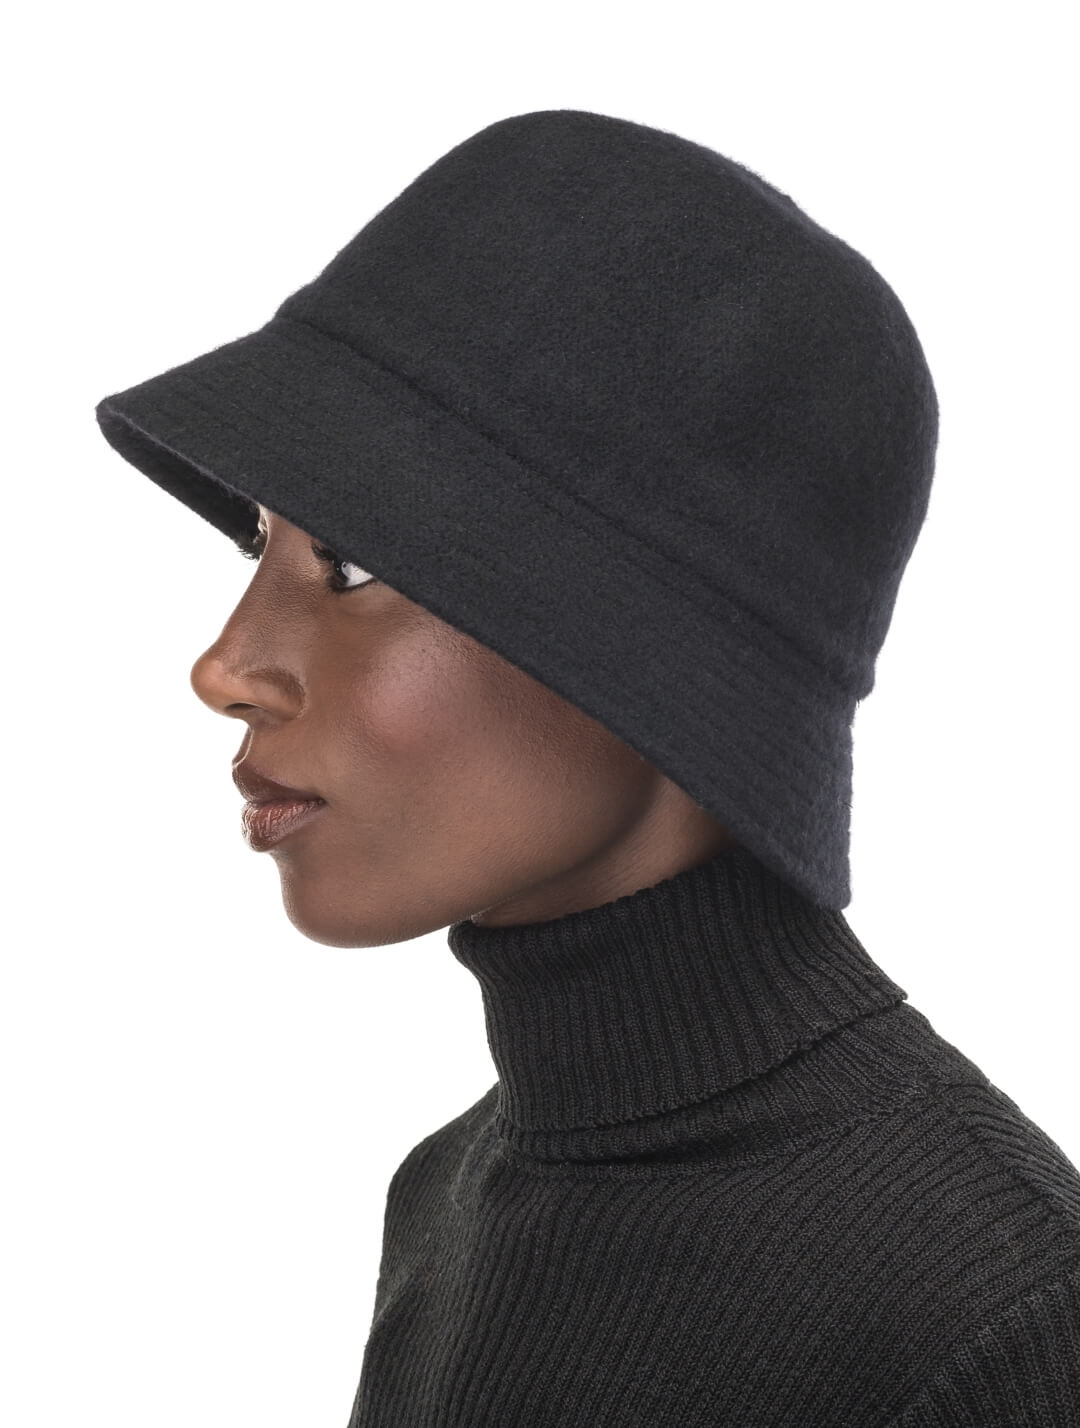 Jaylen Unisex Knit Moulded cloche bucket hat in brushed molded knit, mesh inner band, and trapunto stitching on brim, in Black